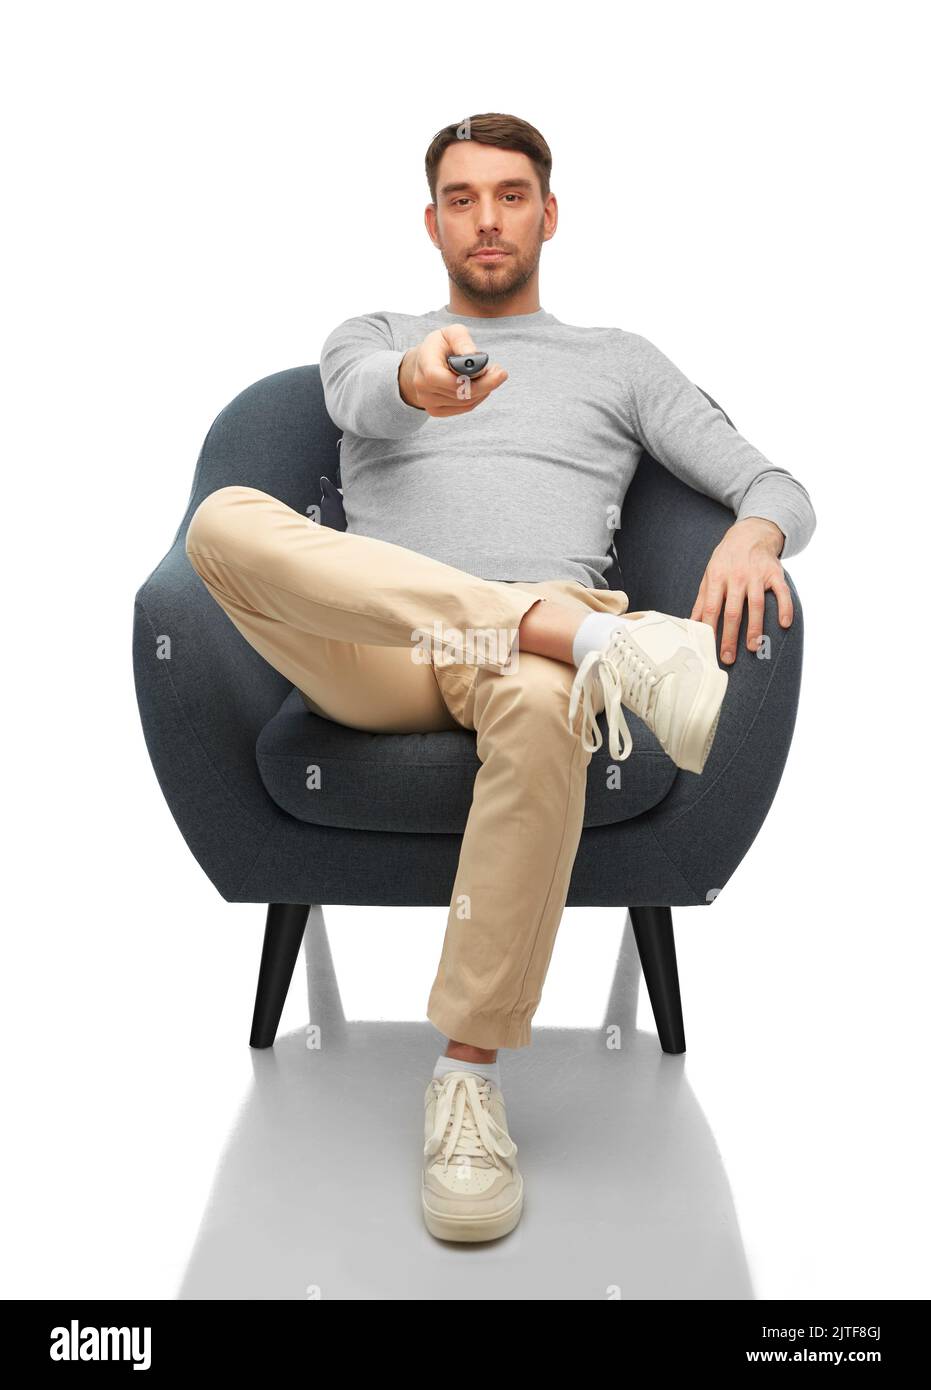 man with tv remote control sitting in chair Stock Photo